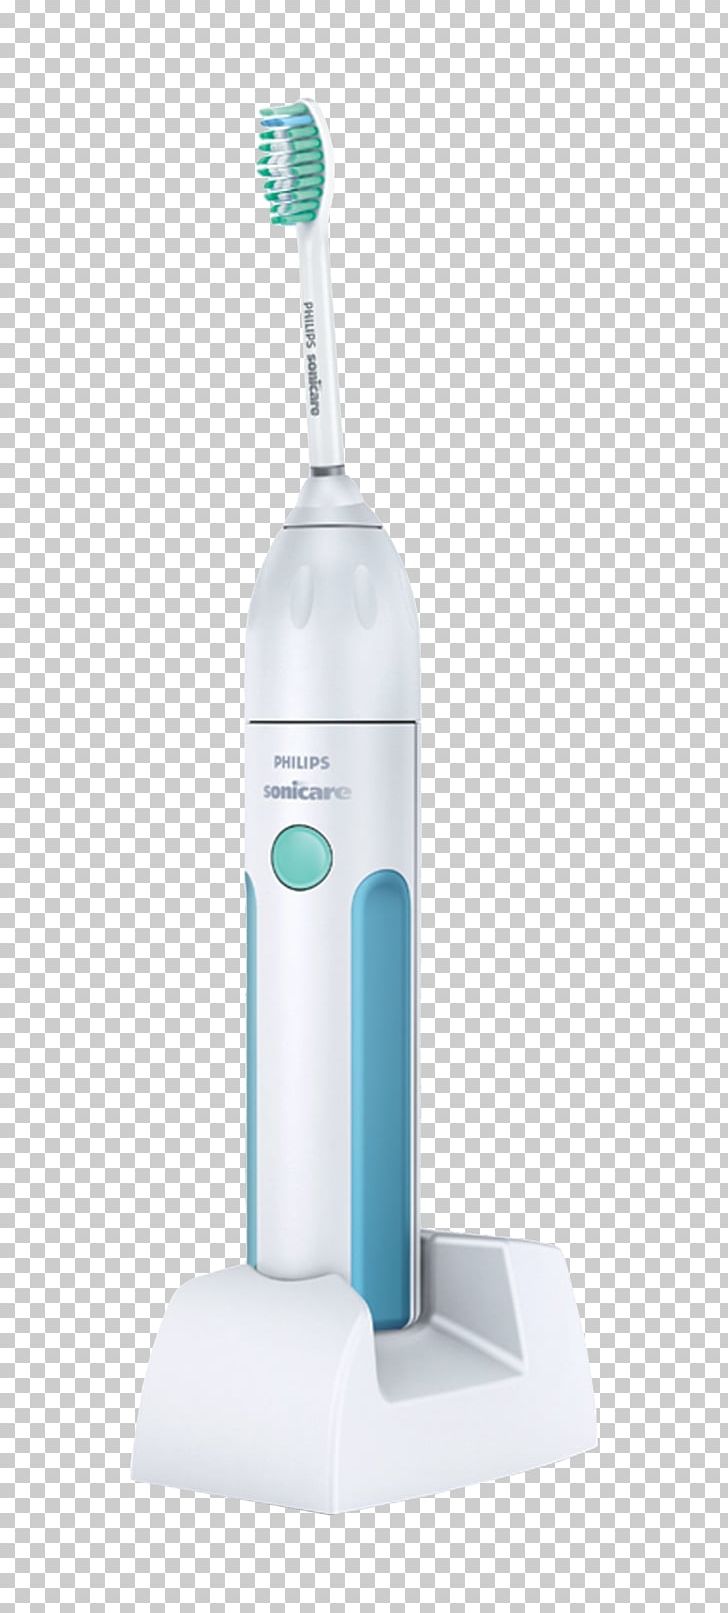 Electric Toothbrush Sonicare Dental Care PNG, Clipart, Bottle, Brush, Dental Care, Dental Plaque, Electric Toothbrush Free PNG Download